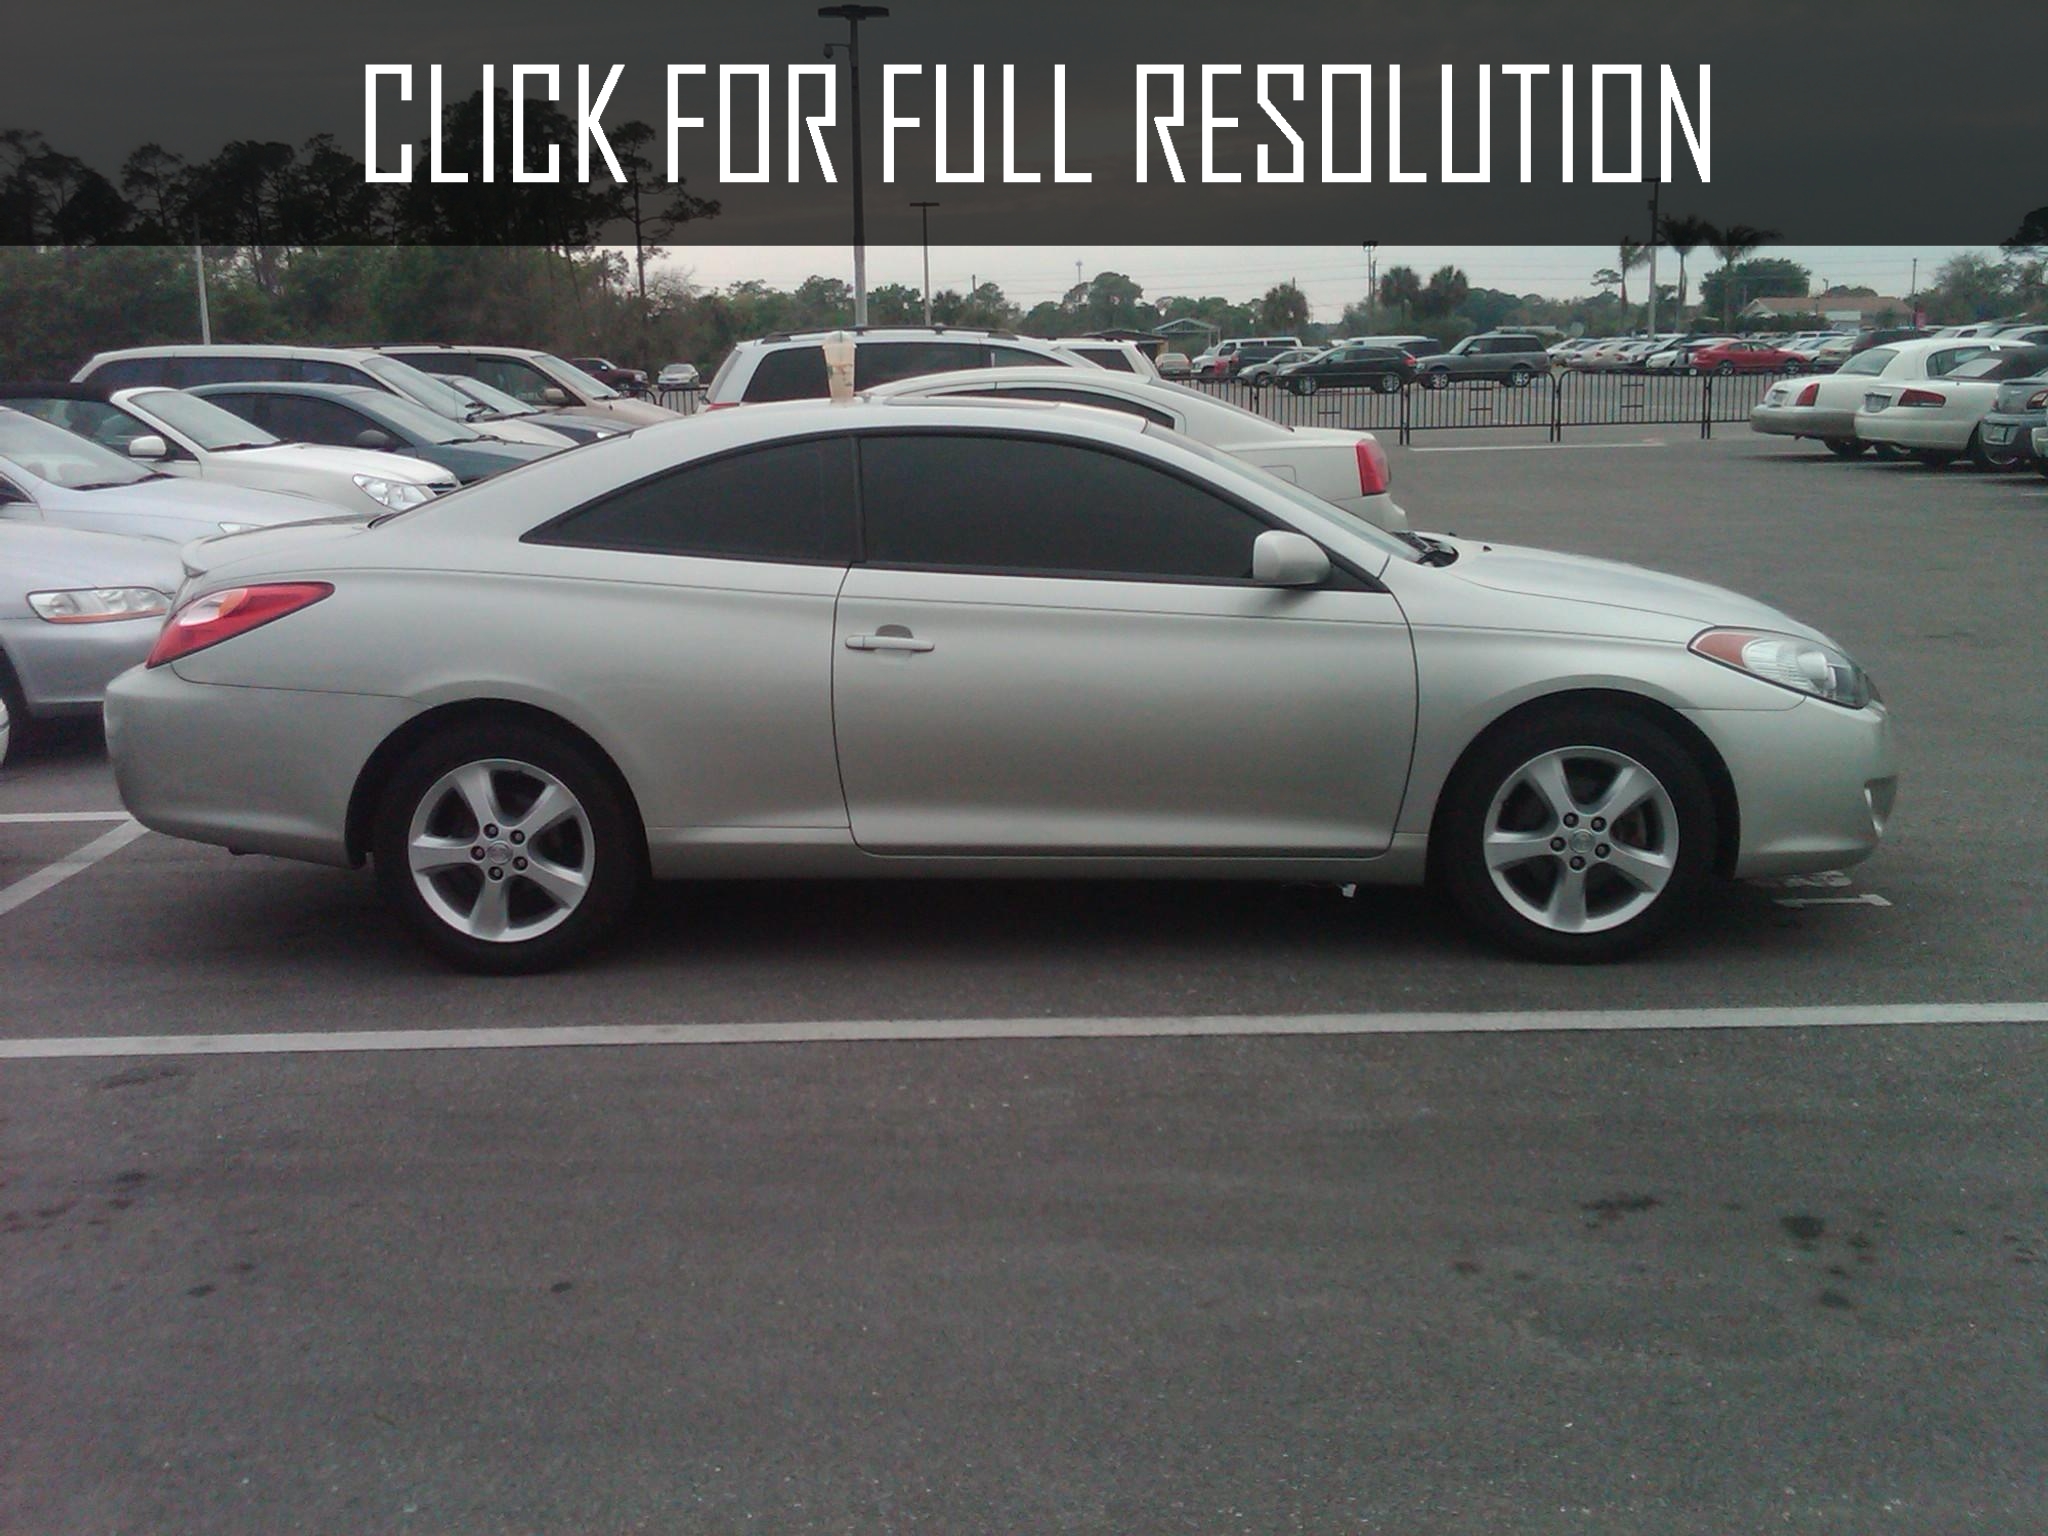 2005 Toyota Camry Coupe